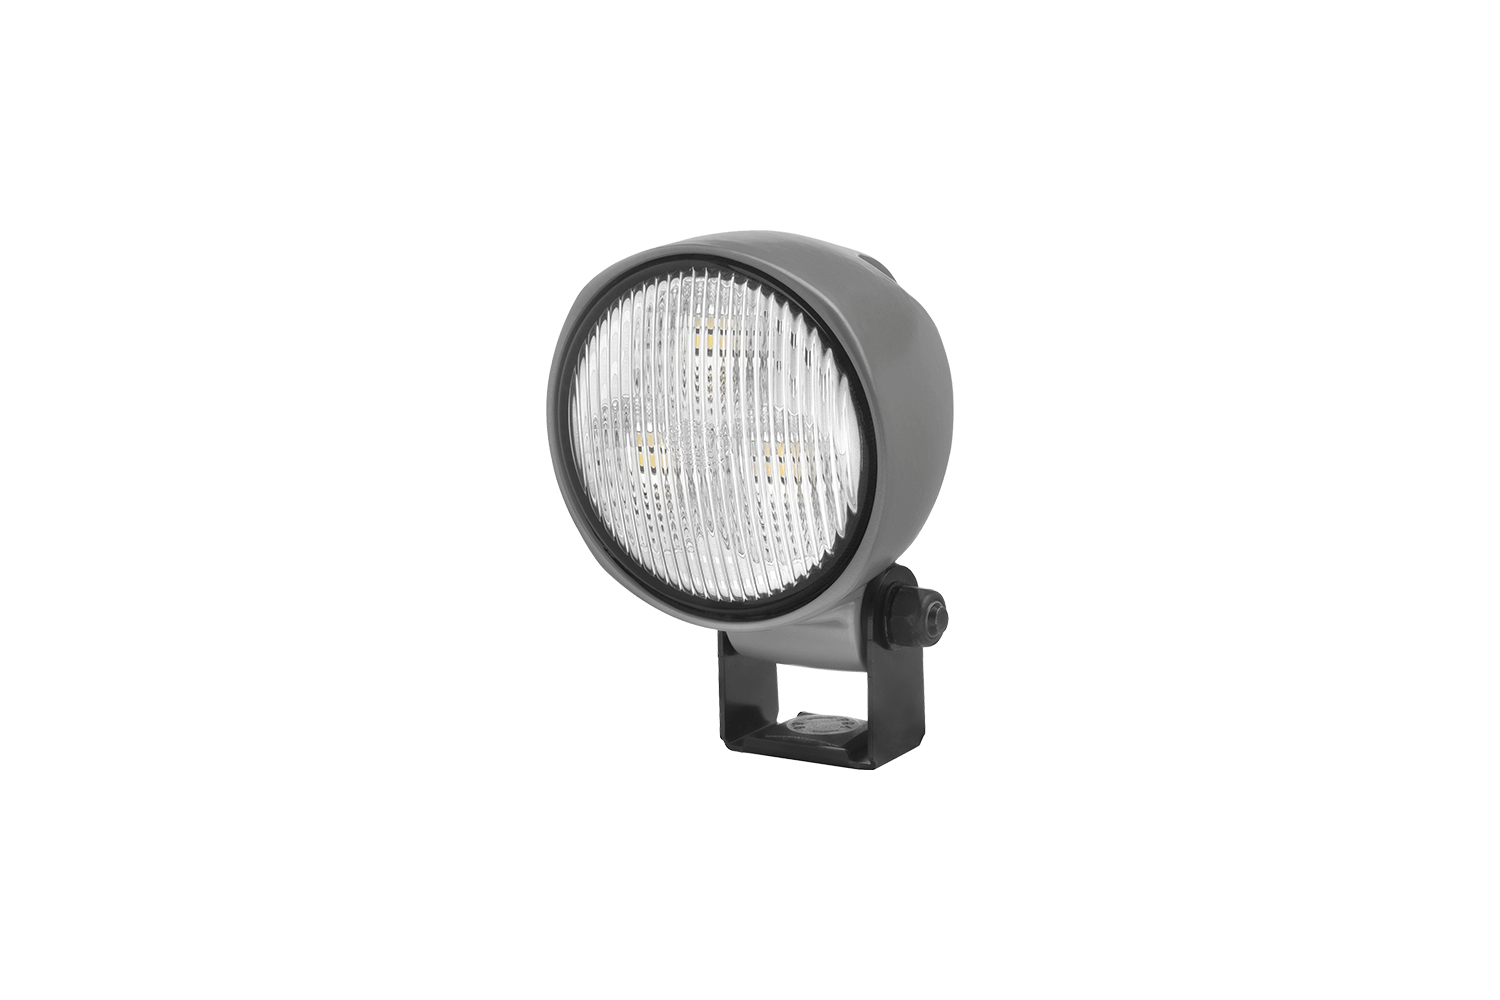 Module 70 LED Generation 3.2 reverse lamp from Hella offered by Patlon